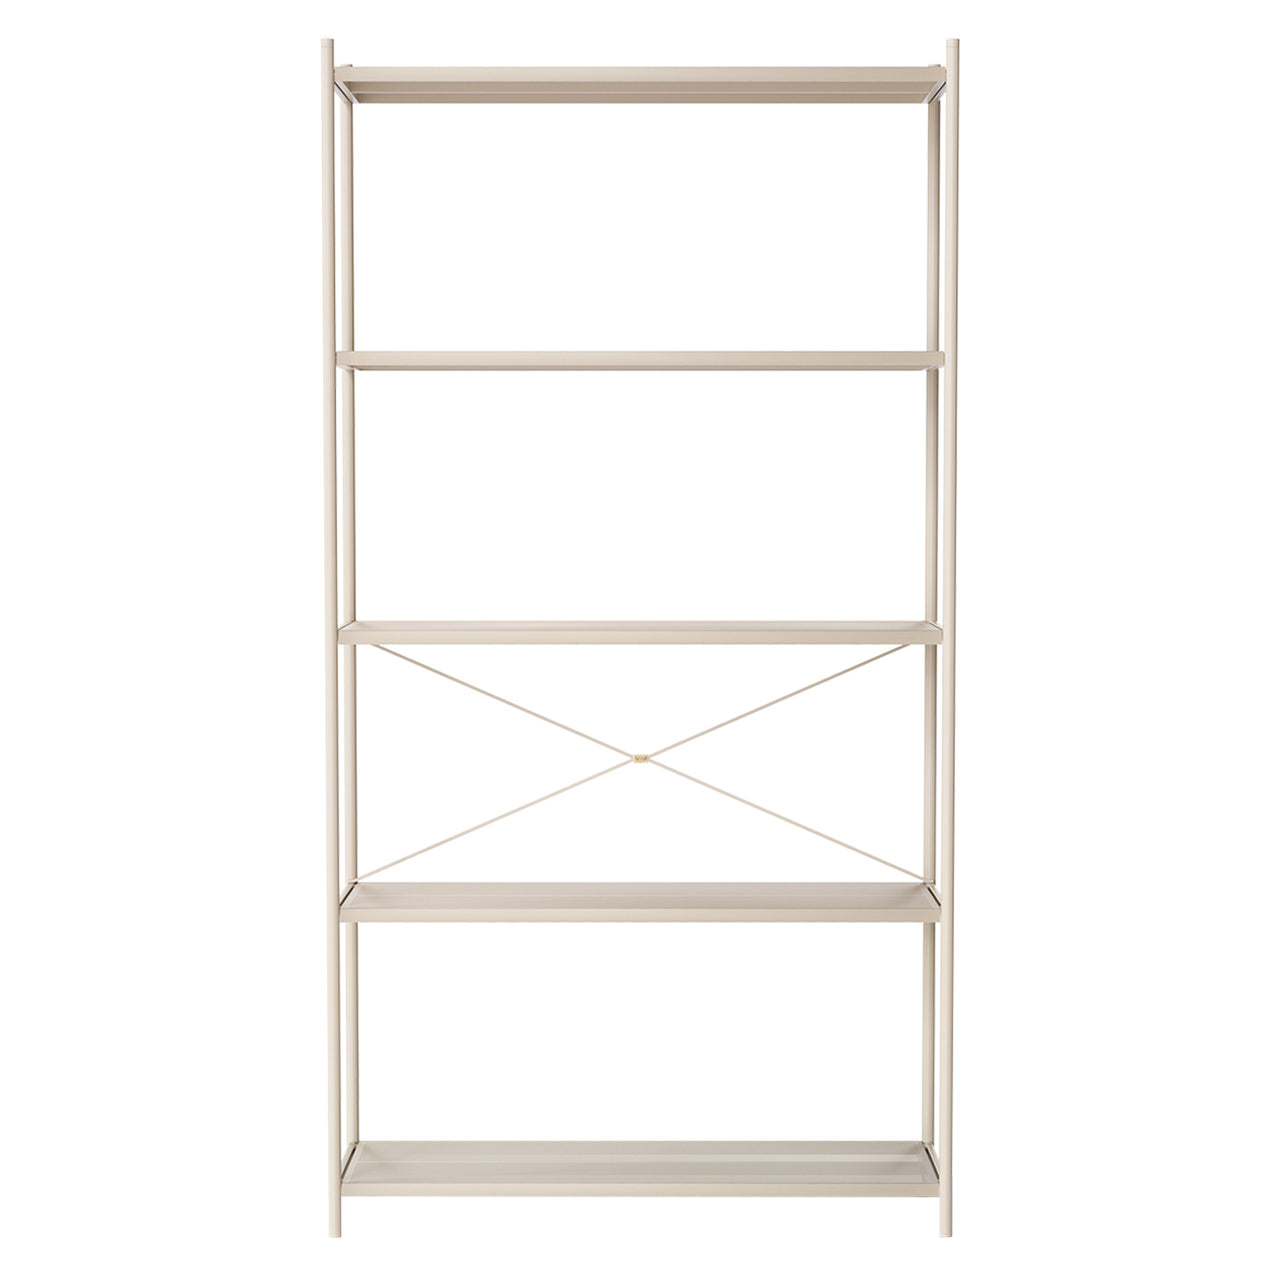 Punctual Shelving System: Configuration 4 + Cashmere (Perforated)